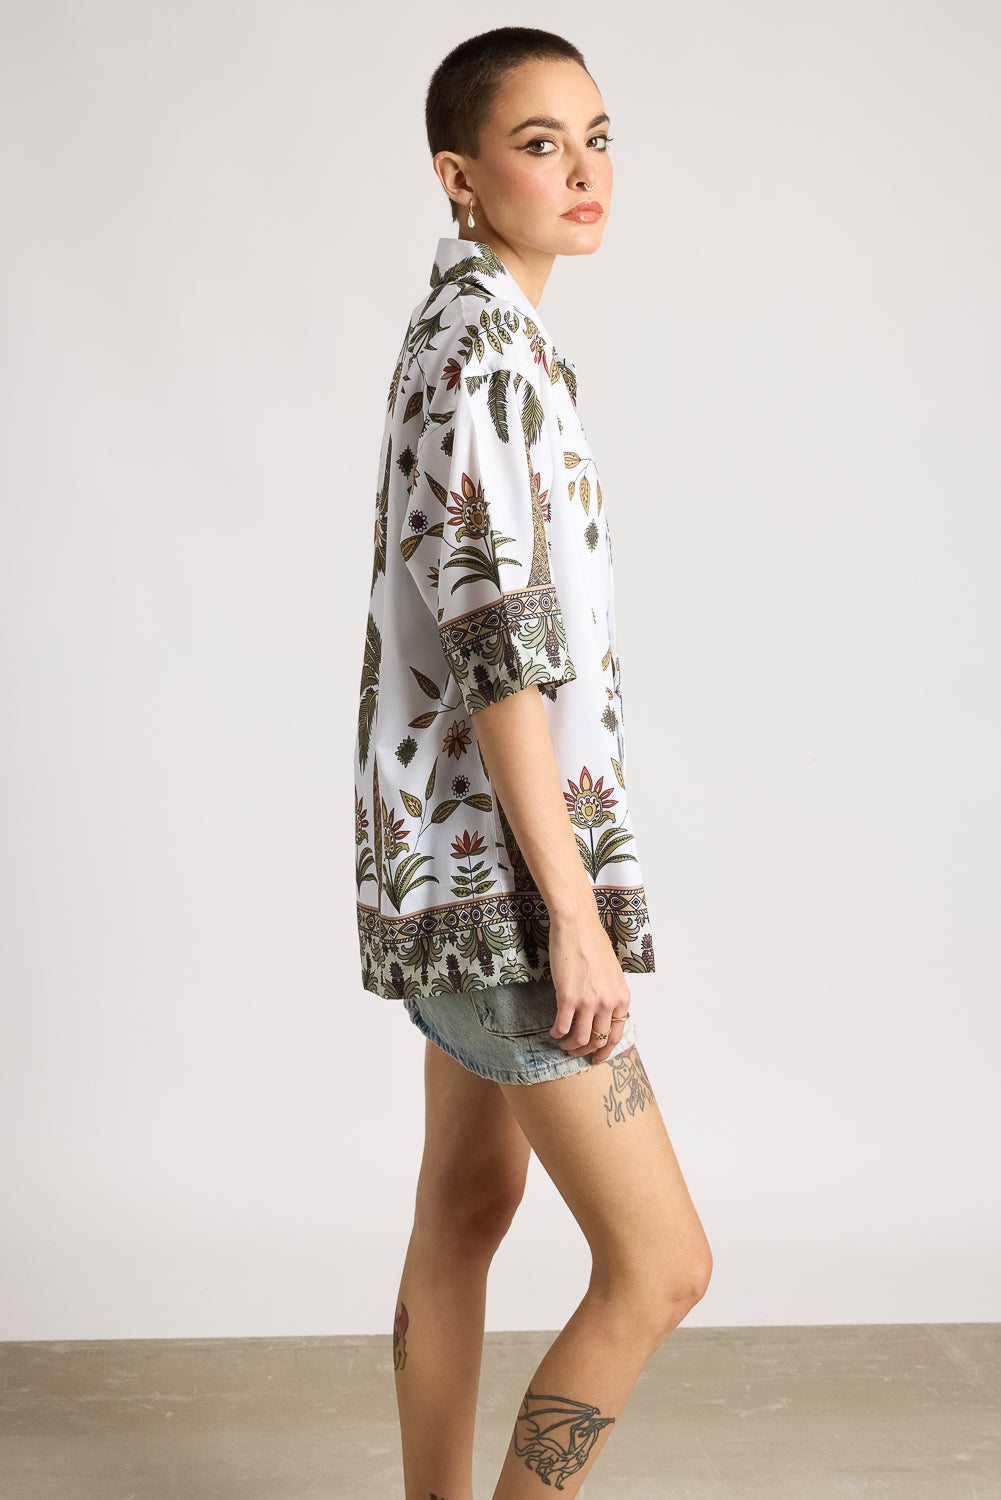 Relaxed Fit Printed Women's Shirt - Coconut Oasis